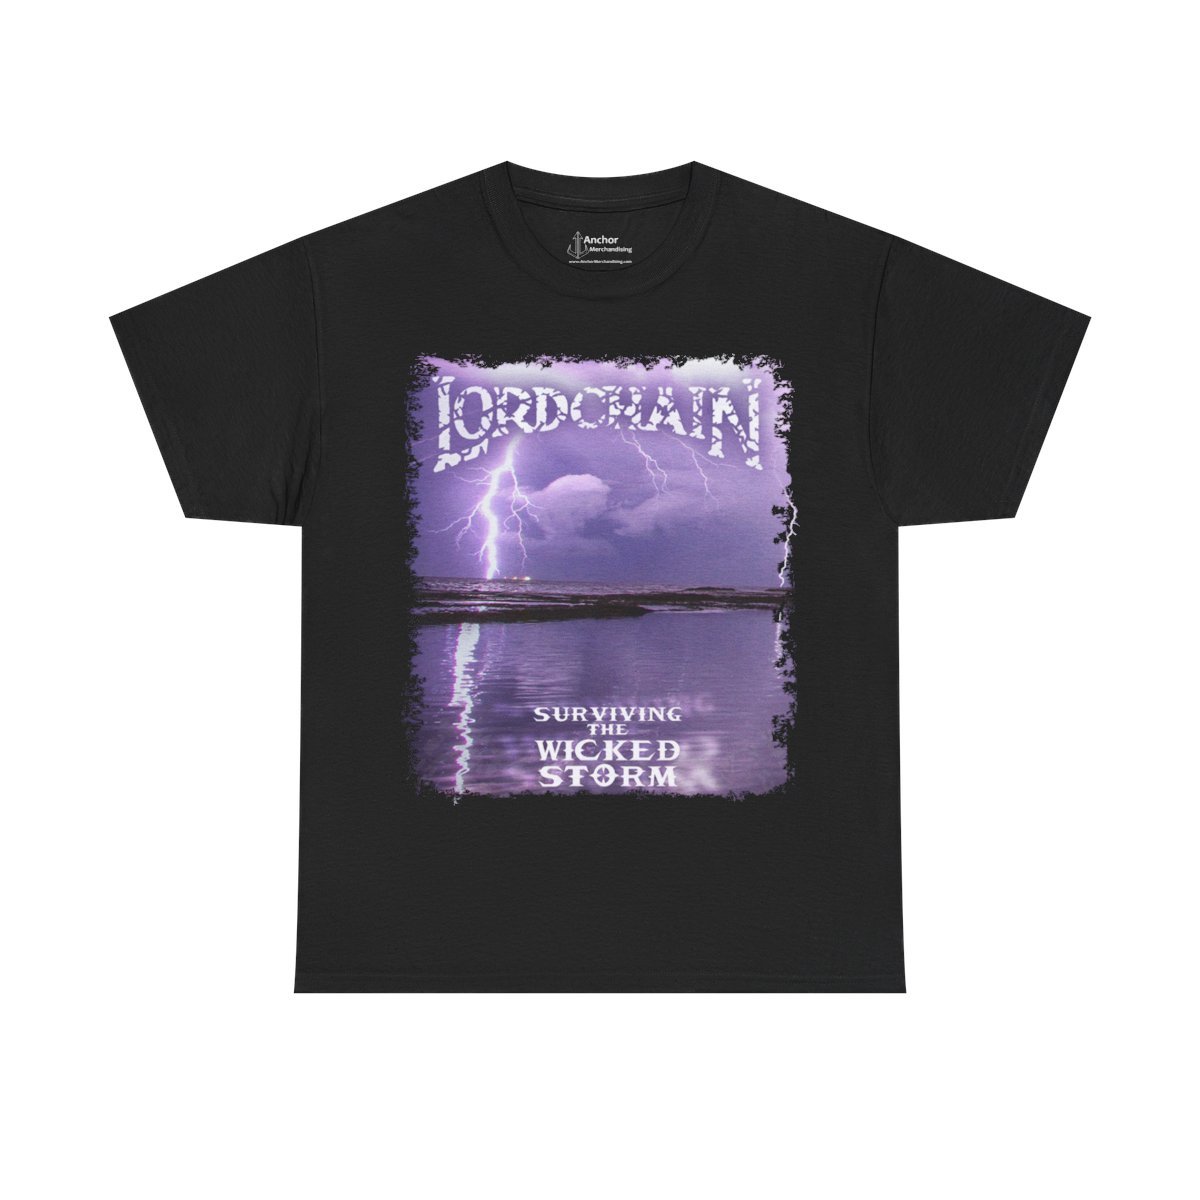 Lordchain – Surviving The Wicked Storm Short Sleeve Tshirt